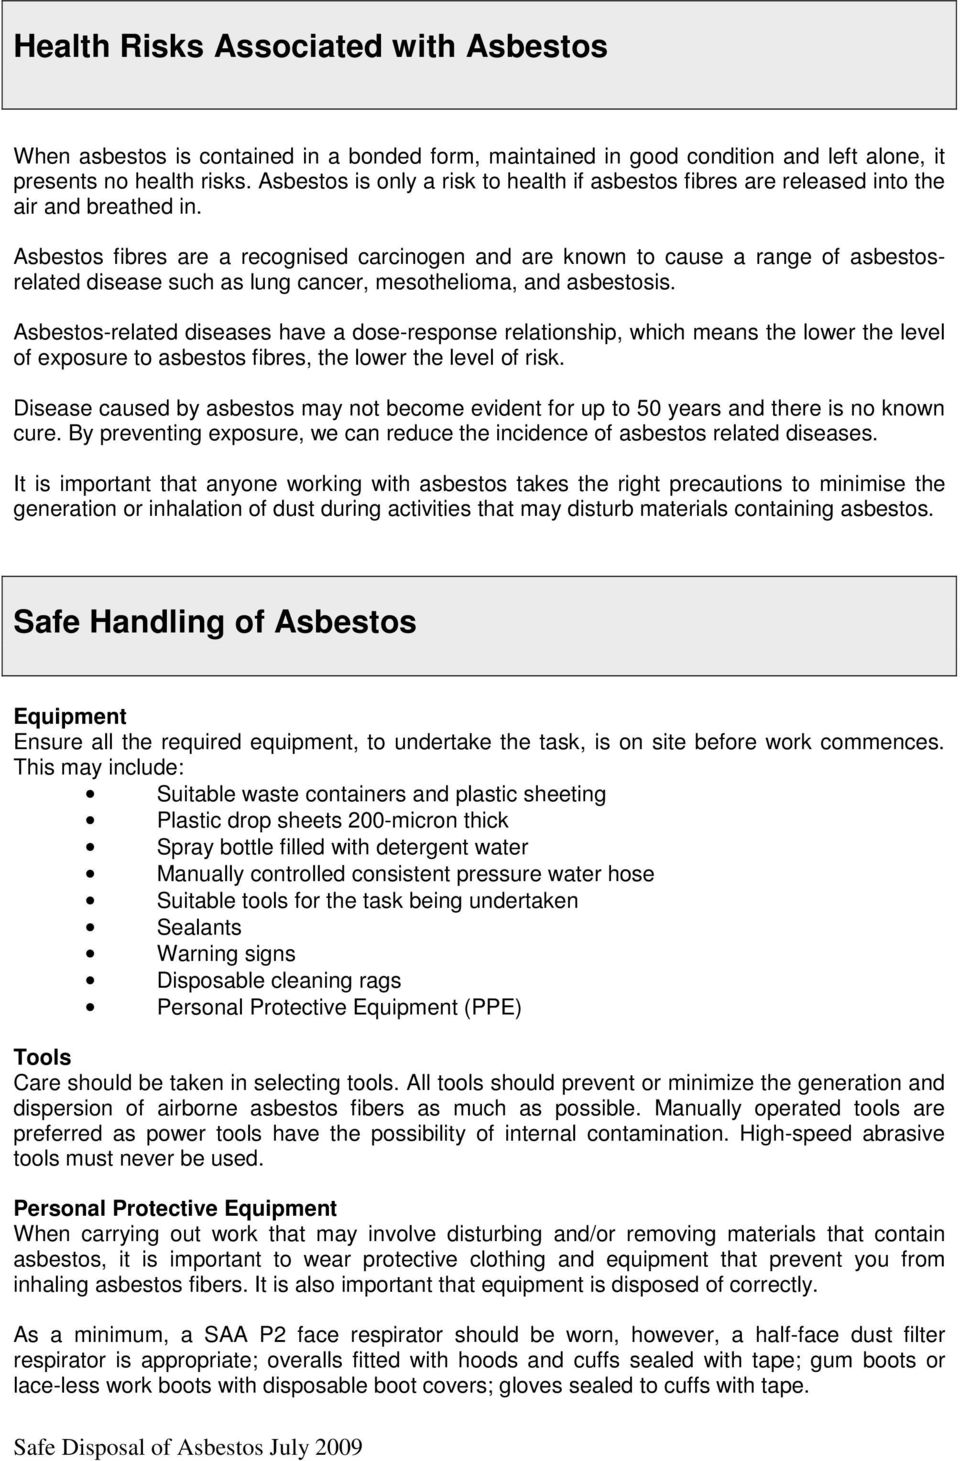 Asbestos fibres are a recognised carcinogen and are known to cause a range of asbestosrelated disease such as lung cancer, mesothelioma, and asbestosis.